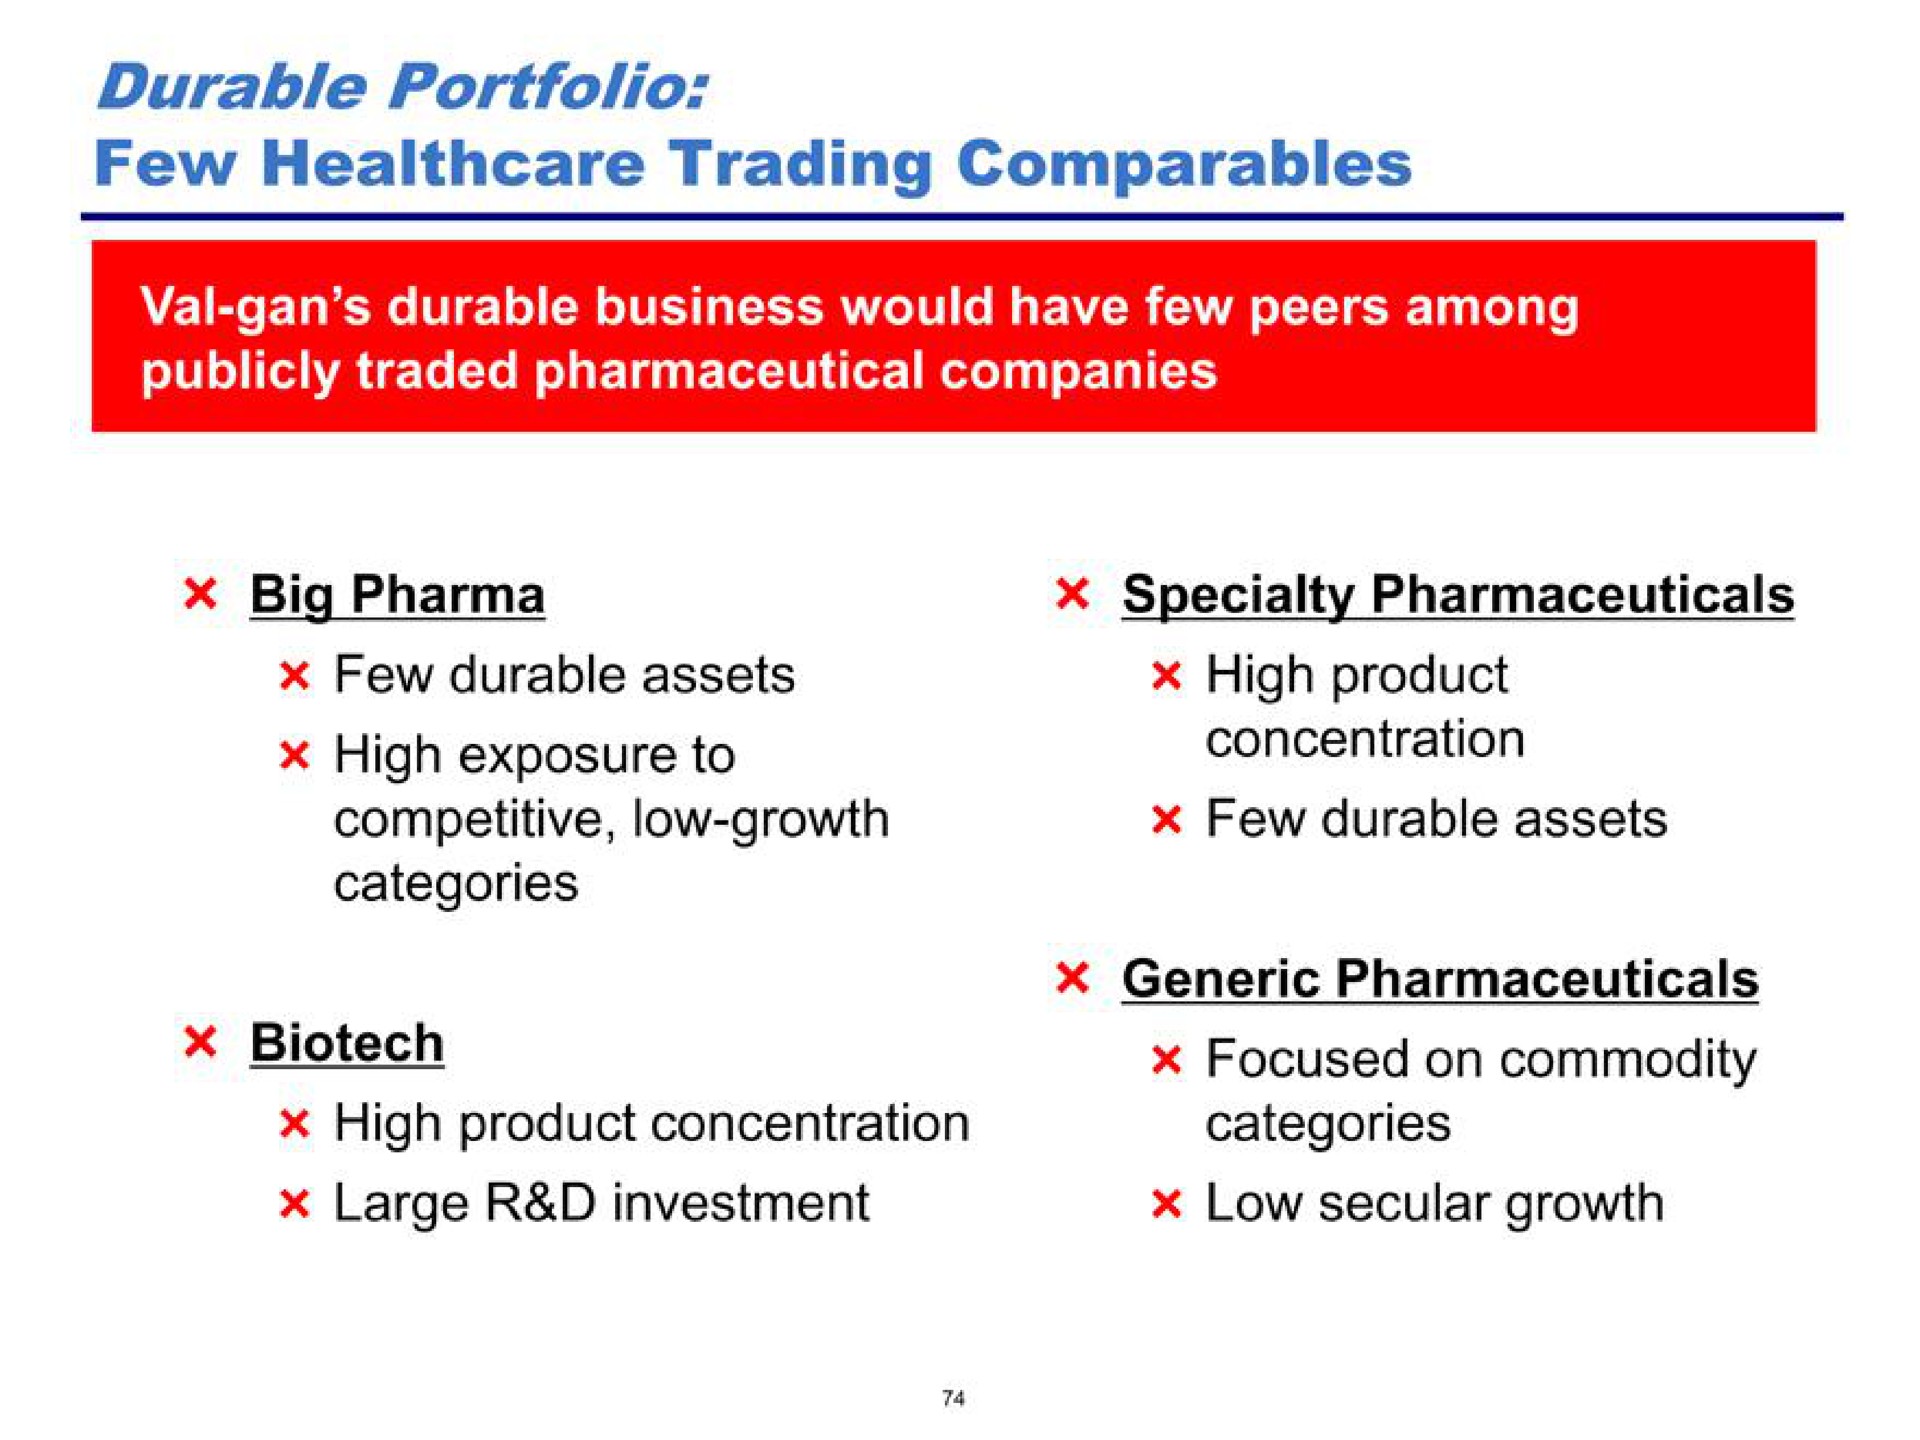 durable portfolio few trading high exposure to concentration generic pharmaceuticals focused on commodity | Pershing Square